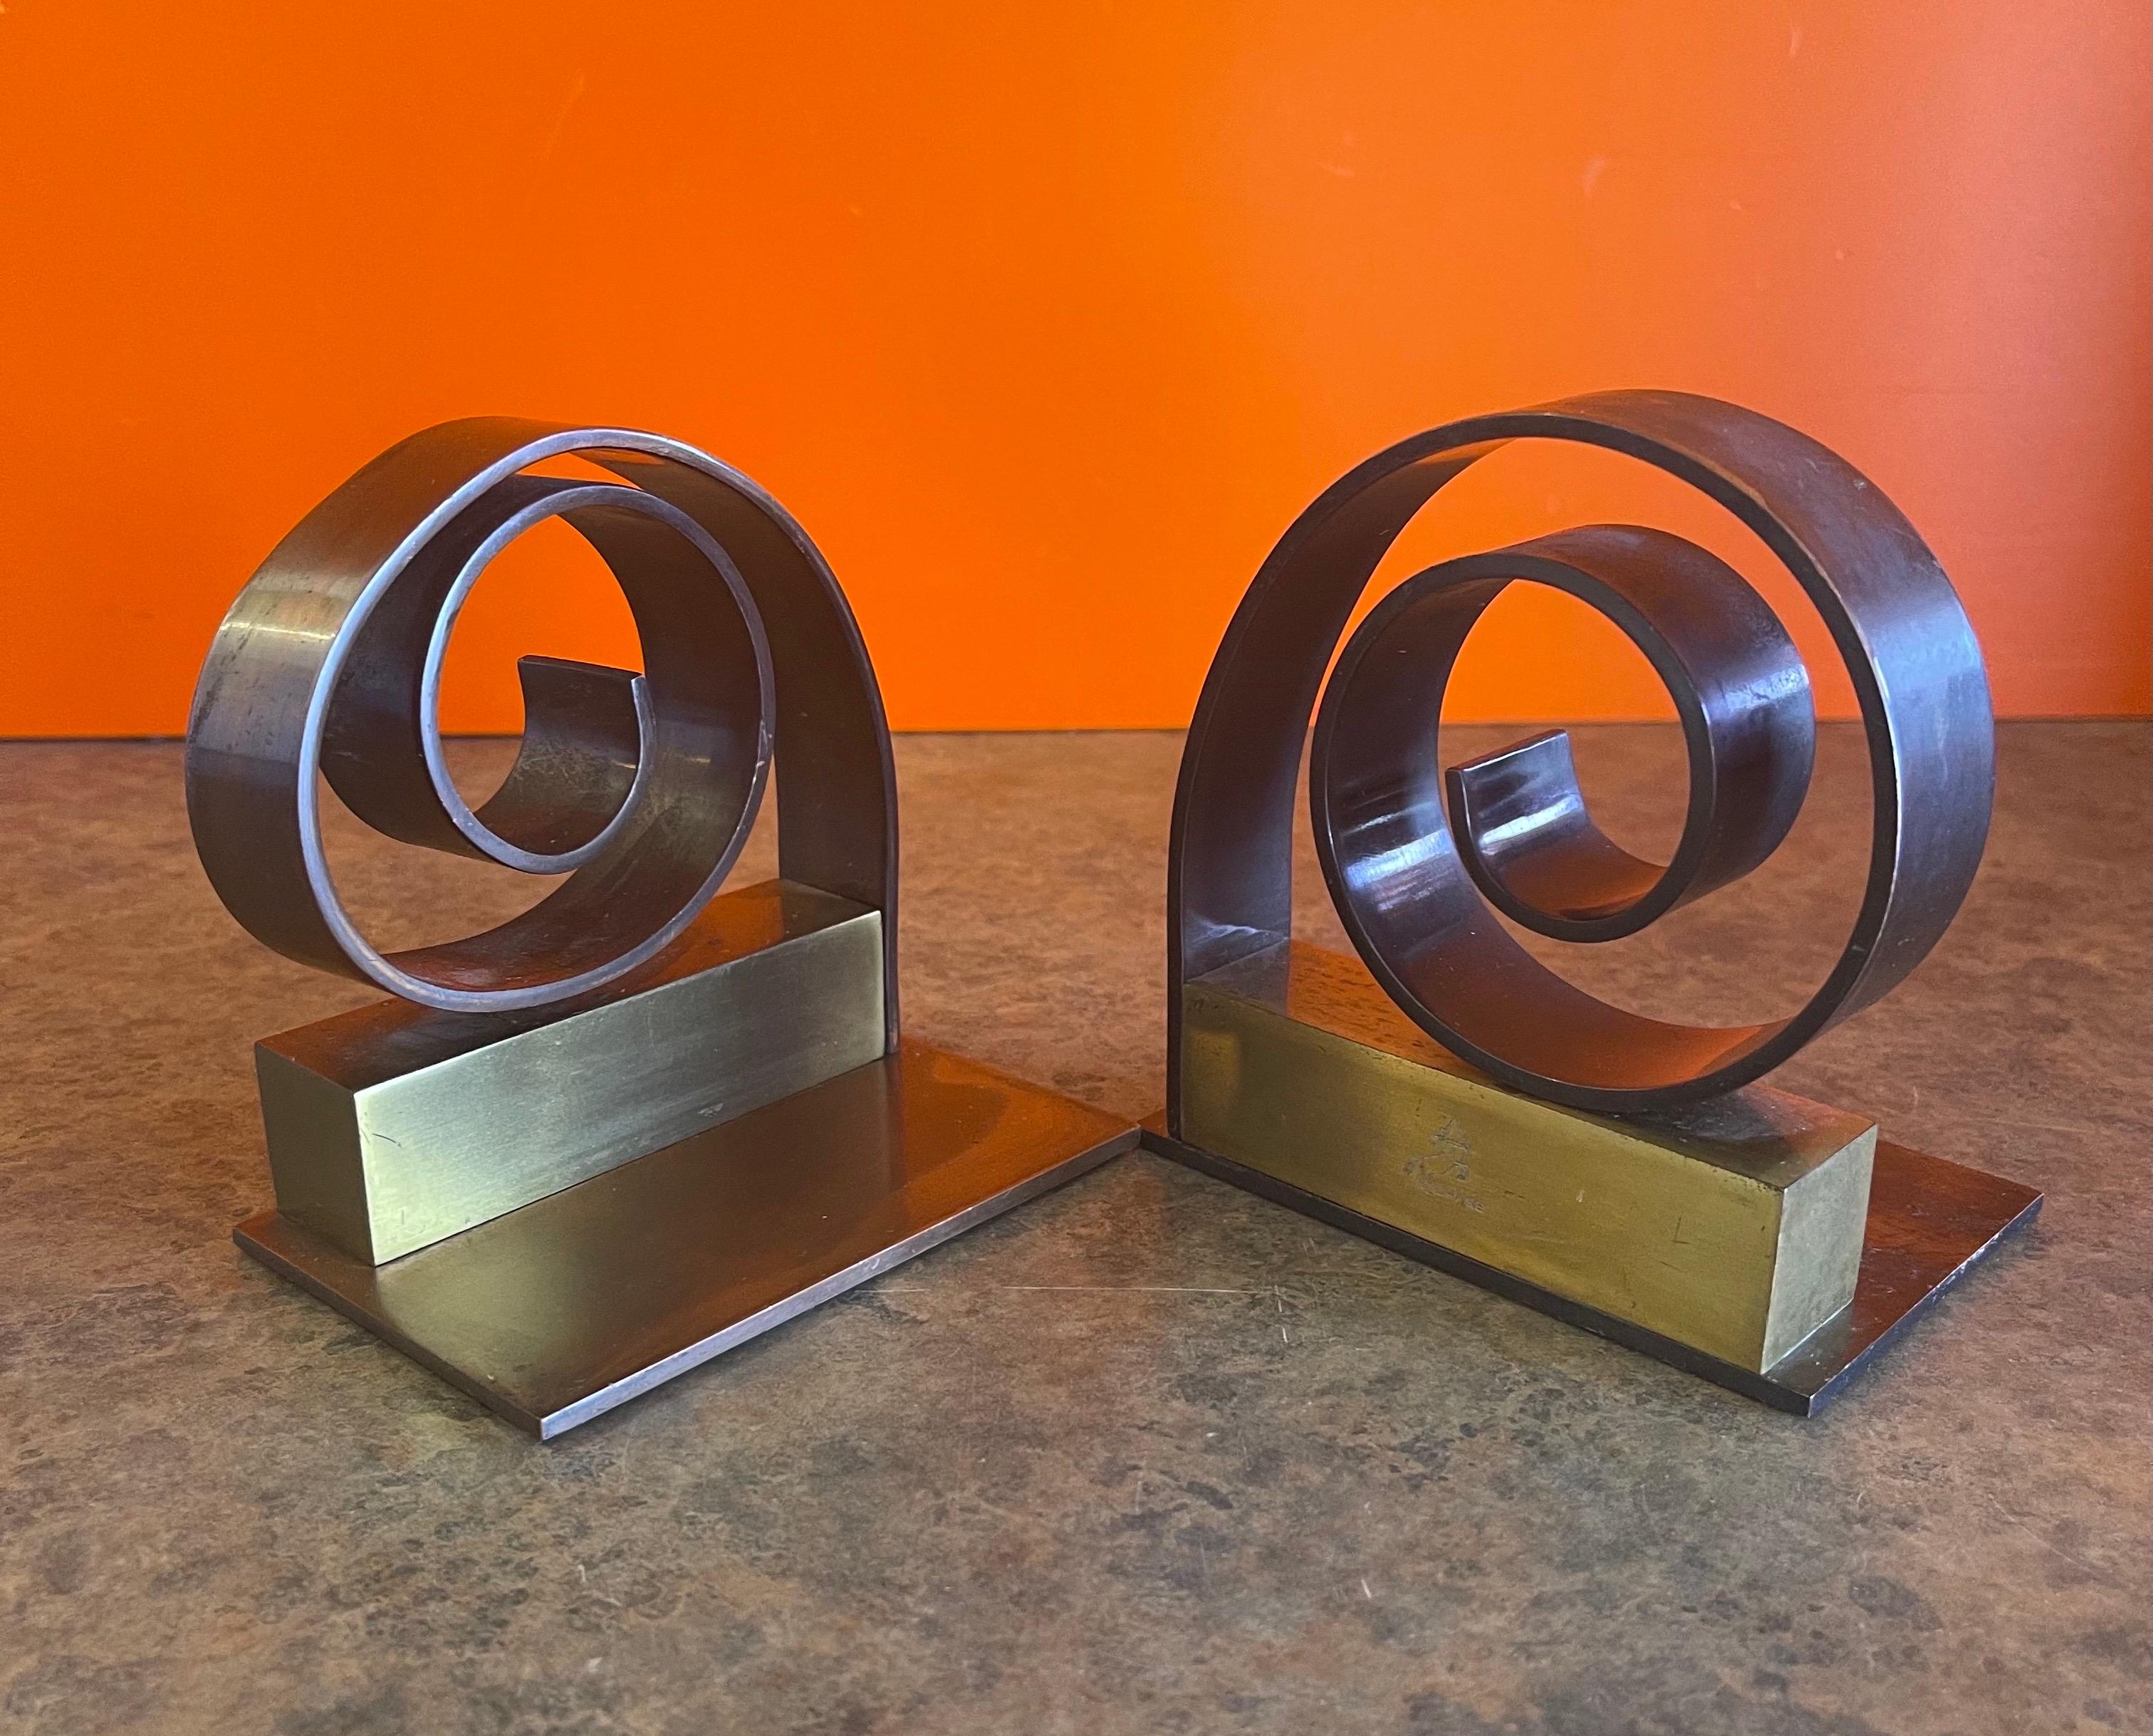 A very nice and hard to find pair of Machine Age / Art Deco / Streamline bookends by Walter Von Nessen for Chase & Co., circa 1930s. These are solid brass & copper bookends with a circular spiral plinth on a square back. The pieces feature felt pads